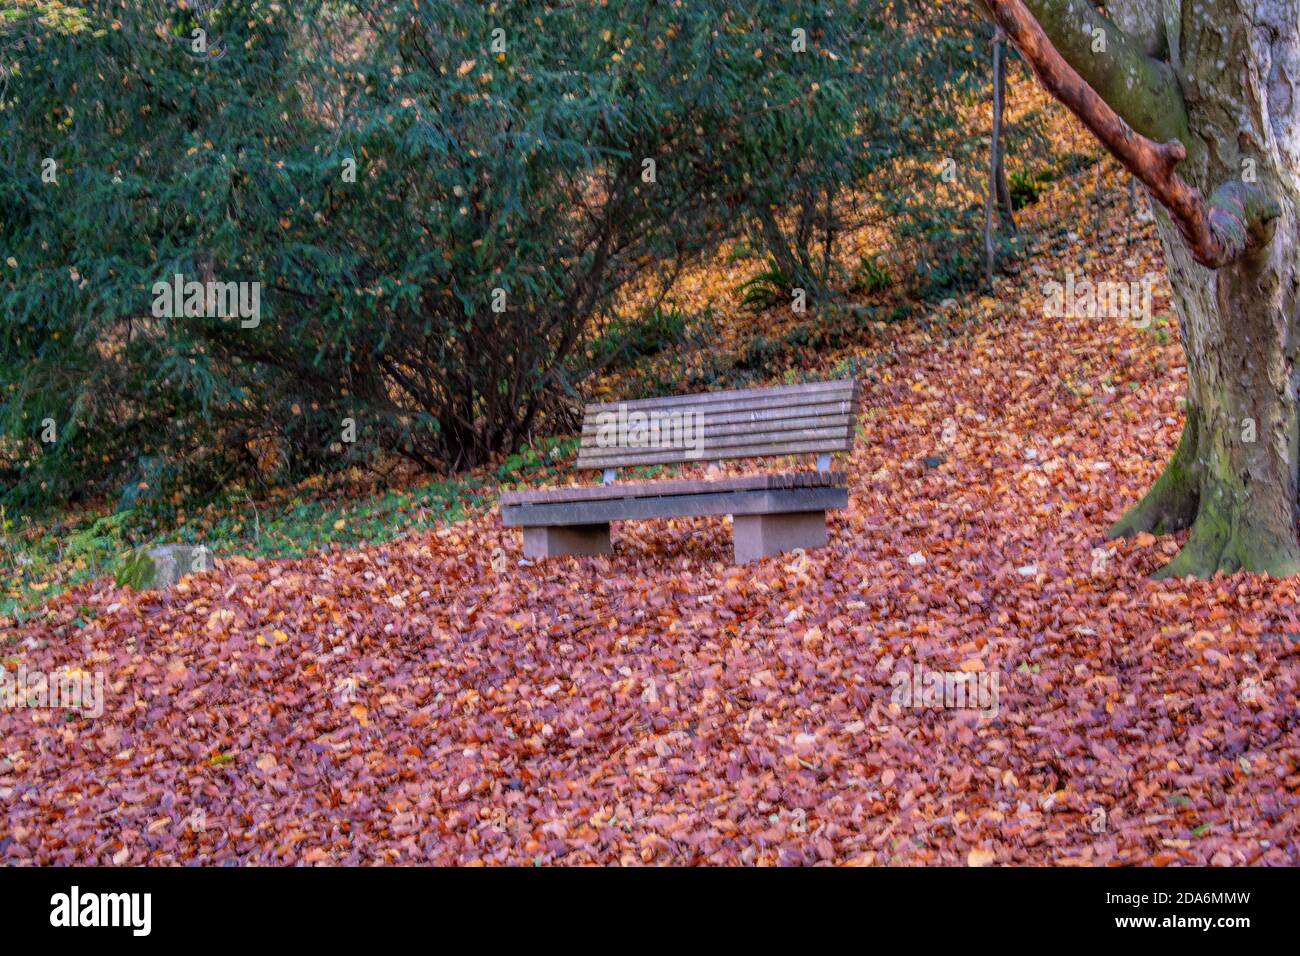 Baden-Württemberg : The bench Stock Photo